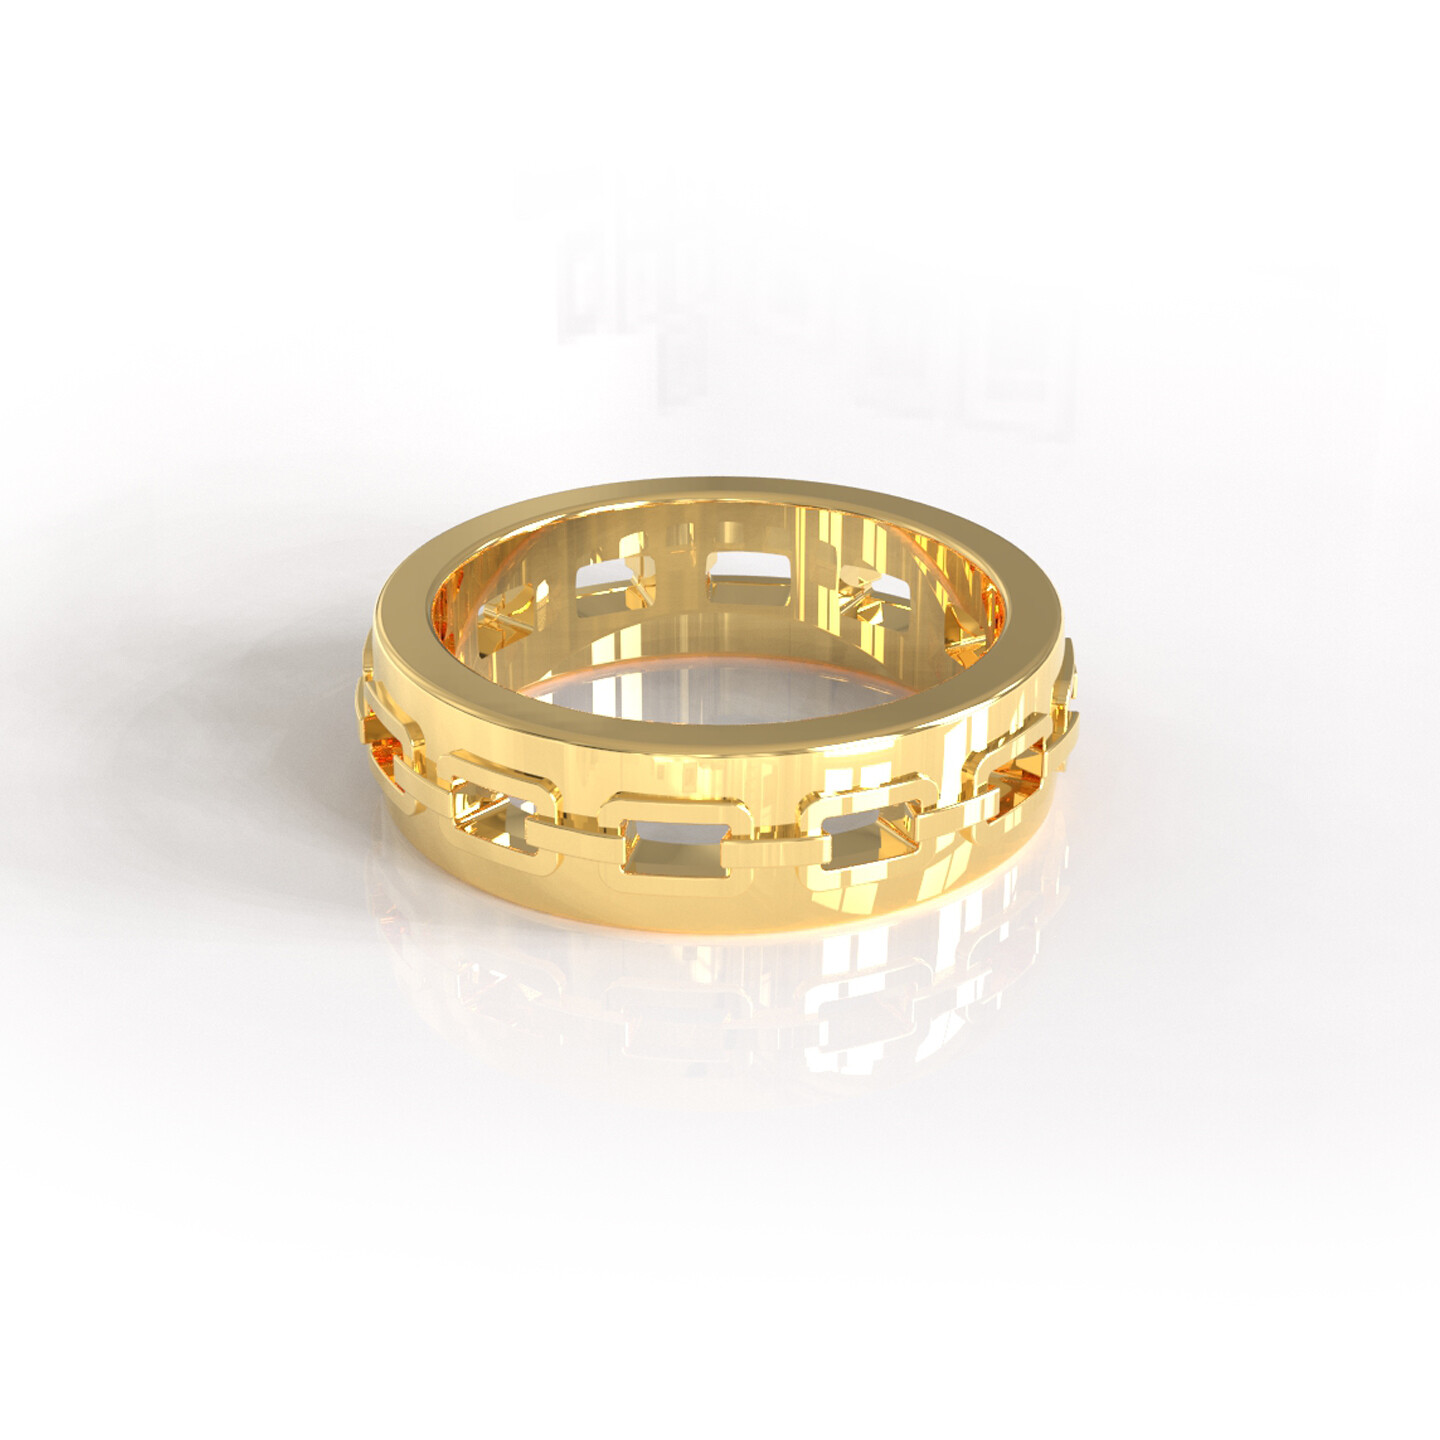 Amastouchwhenever Embracing Self Empowerment Ring Gold Colour EU/FRANCE SIZE 64.6mm inner diameter